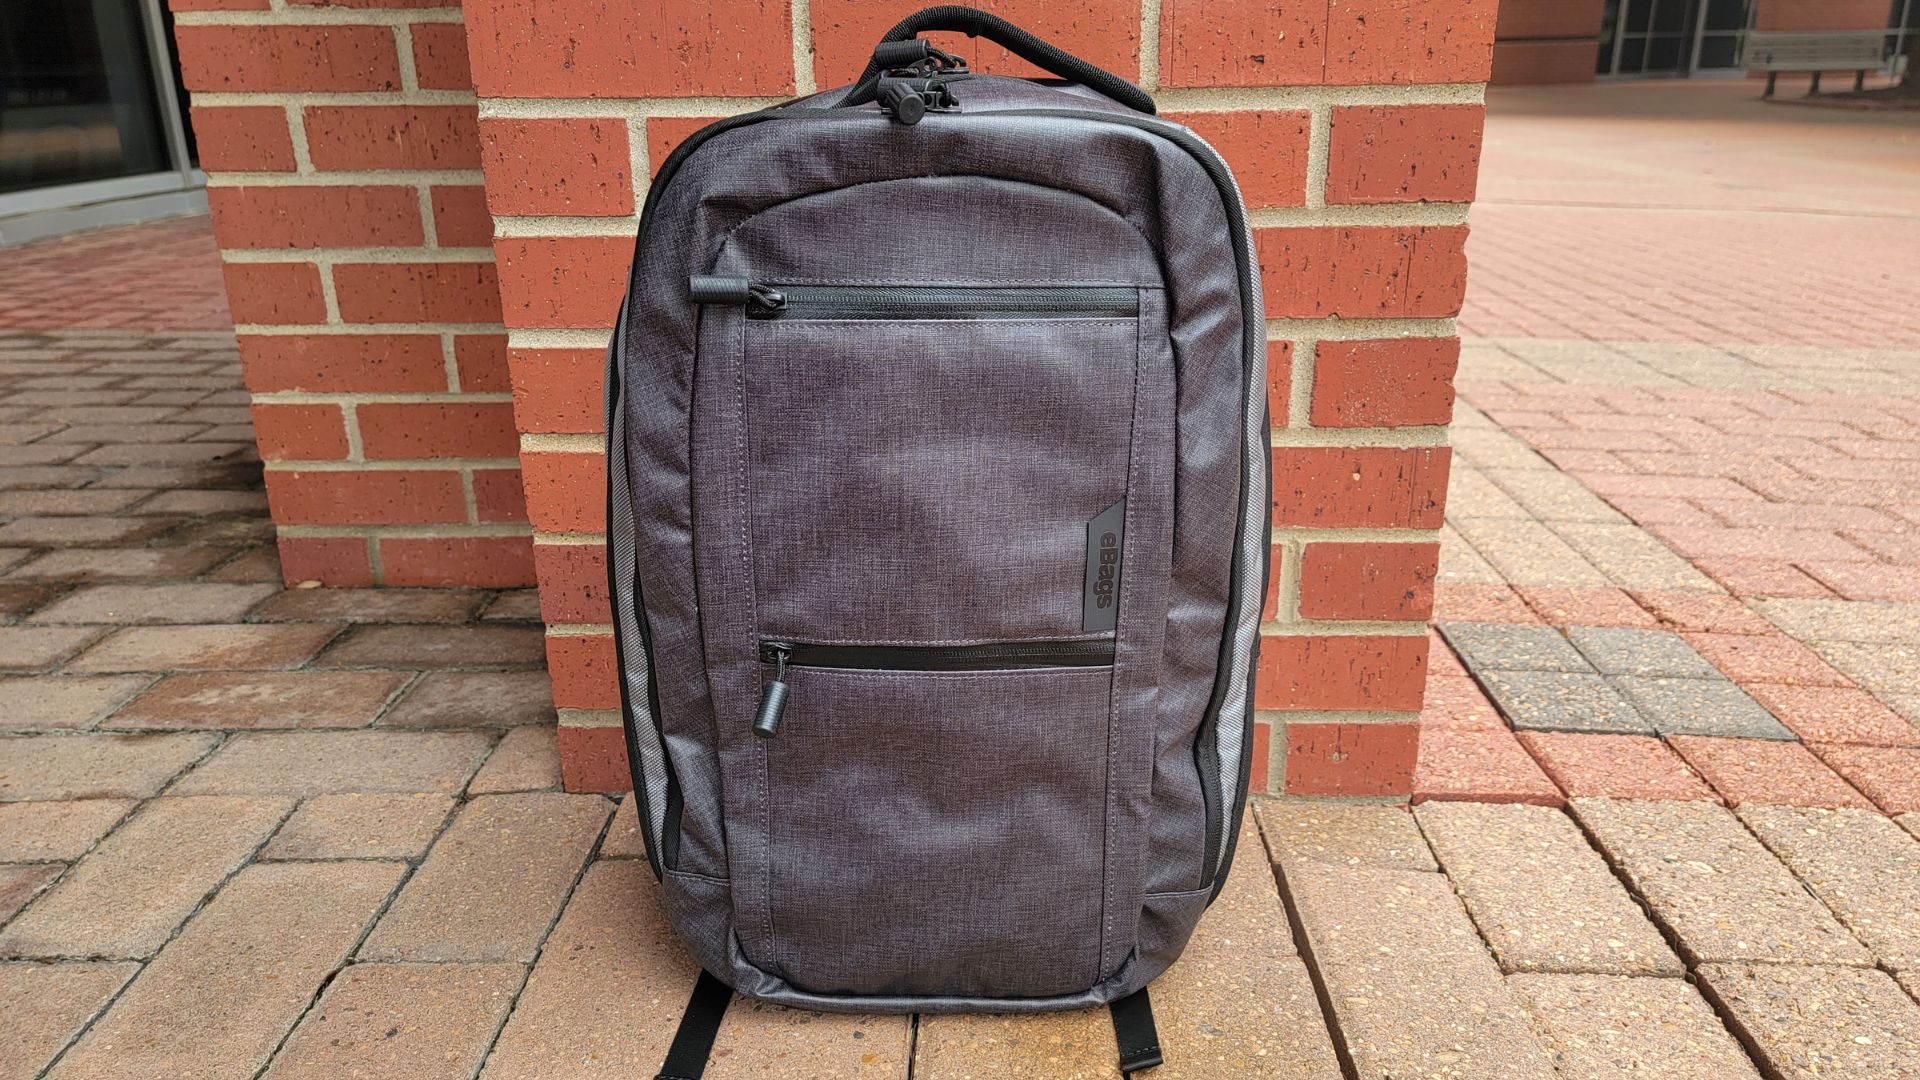 eBags Luxon Laptop Backpack review